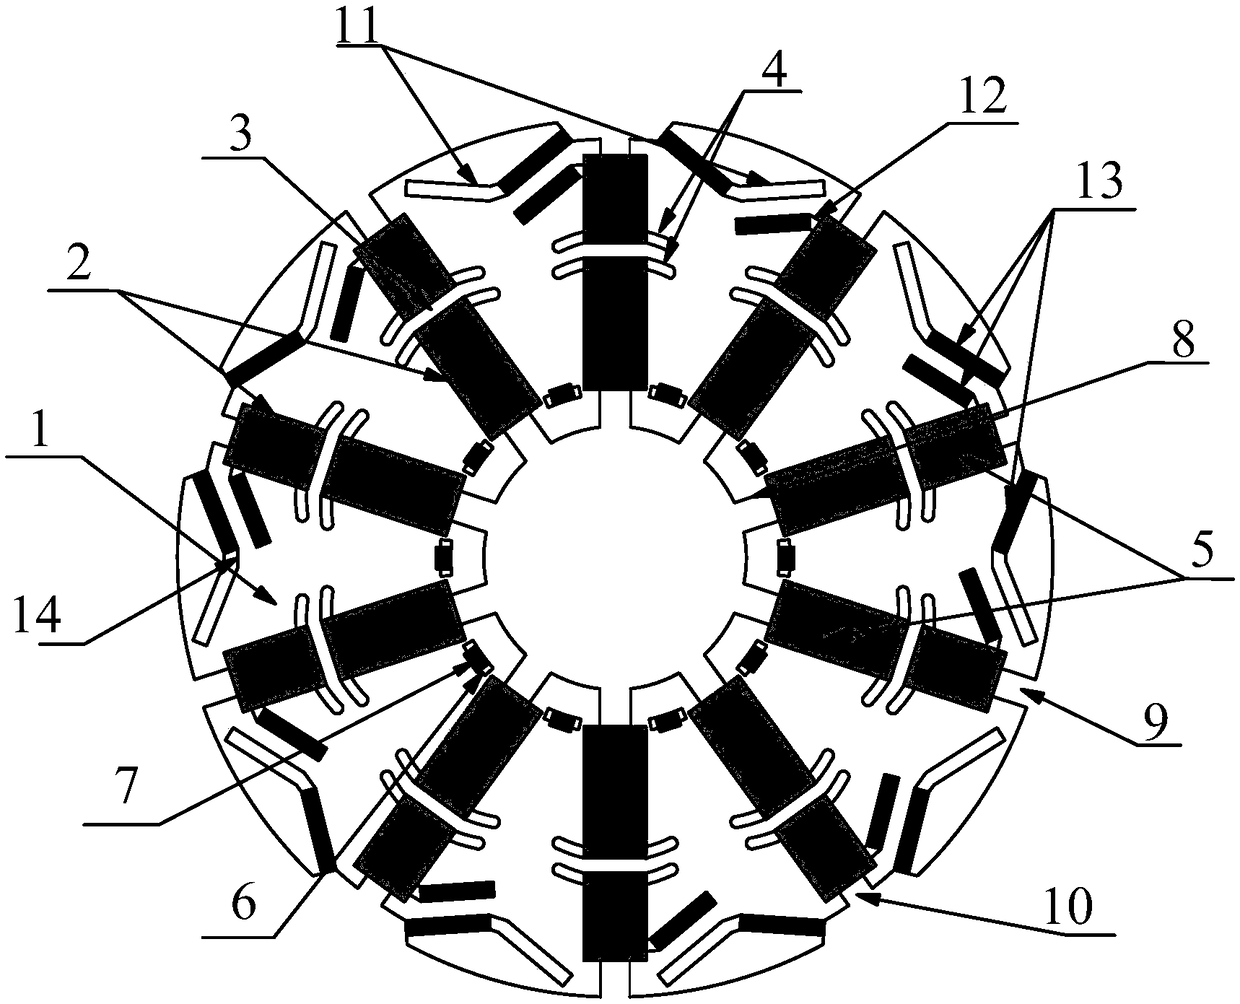 Rotor structure of asymmetric few-rare-earth-mixed permanent magnet motor